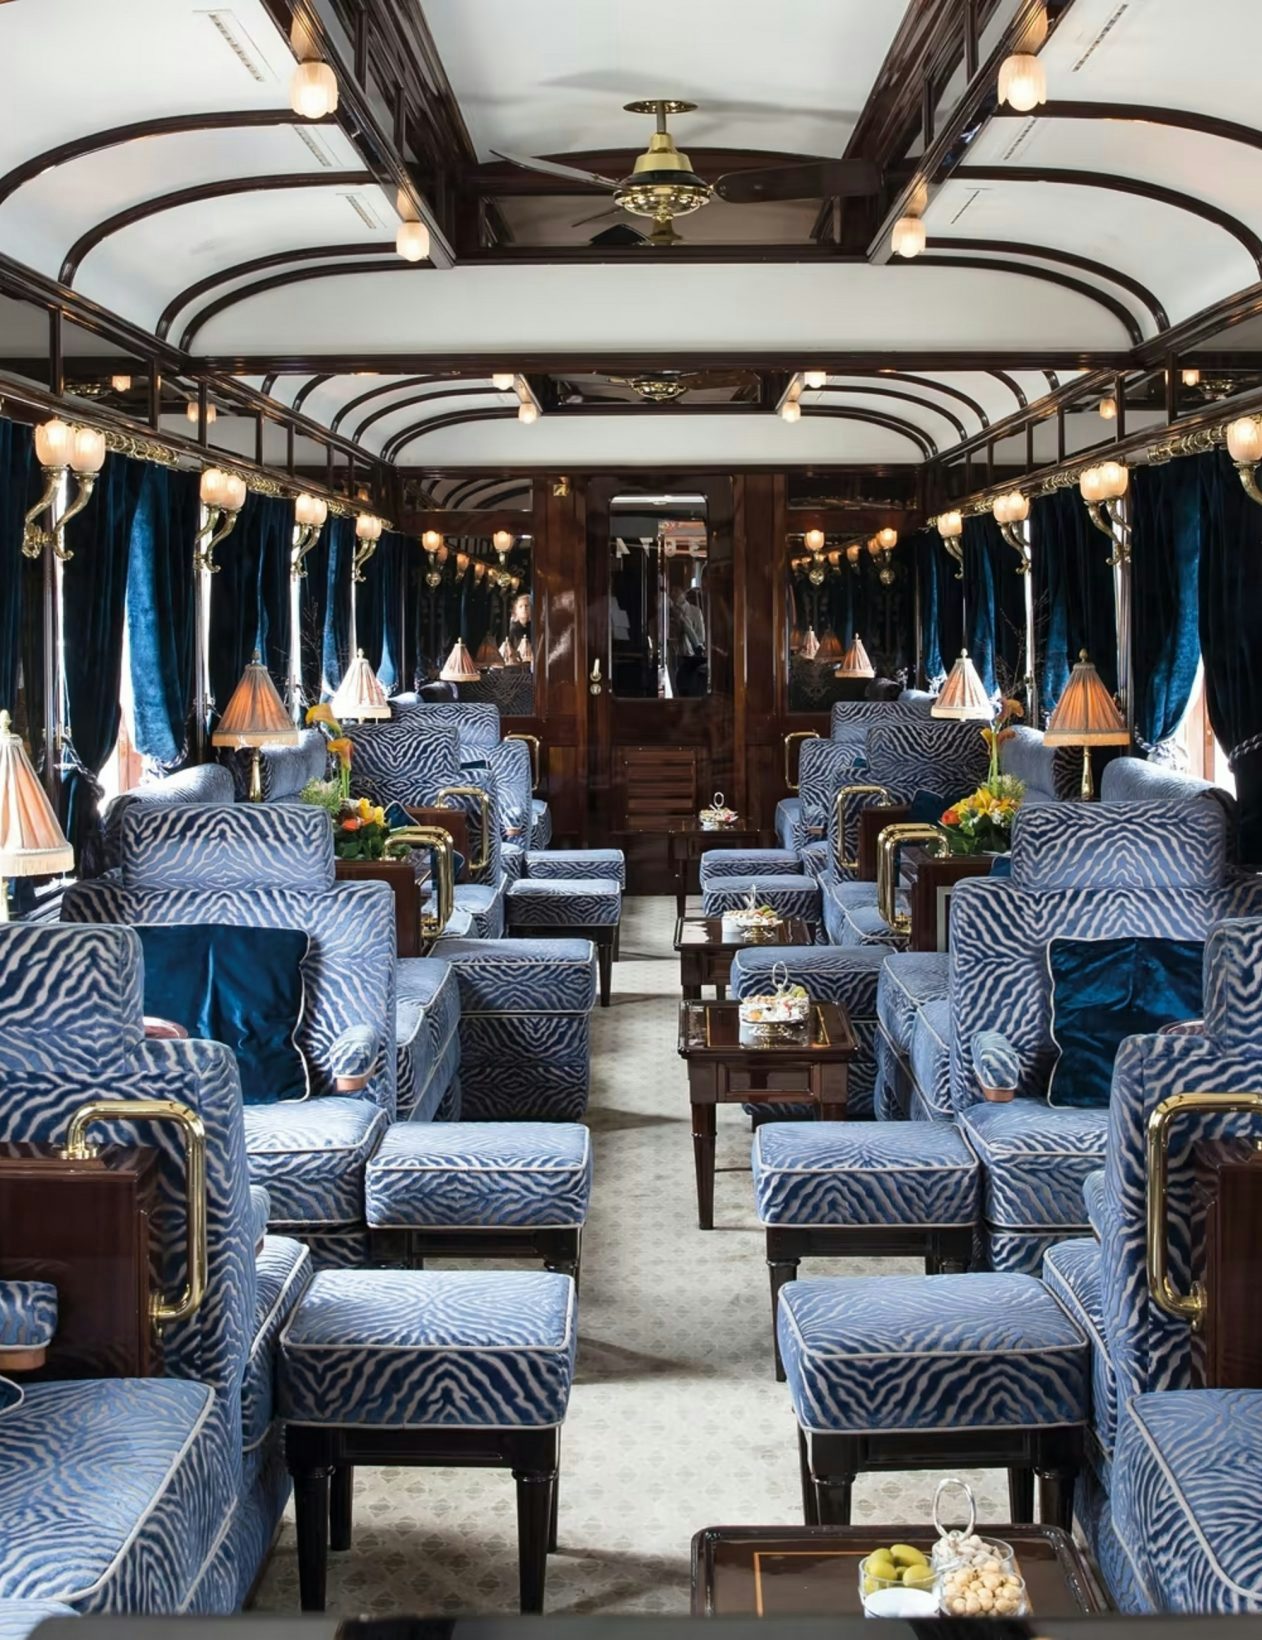 Belmond inaugurates a new rail route at the bottom of the Alps